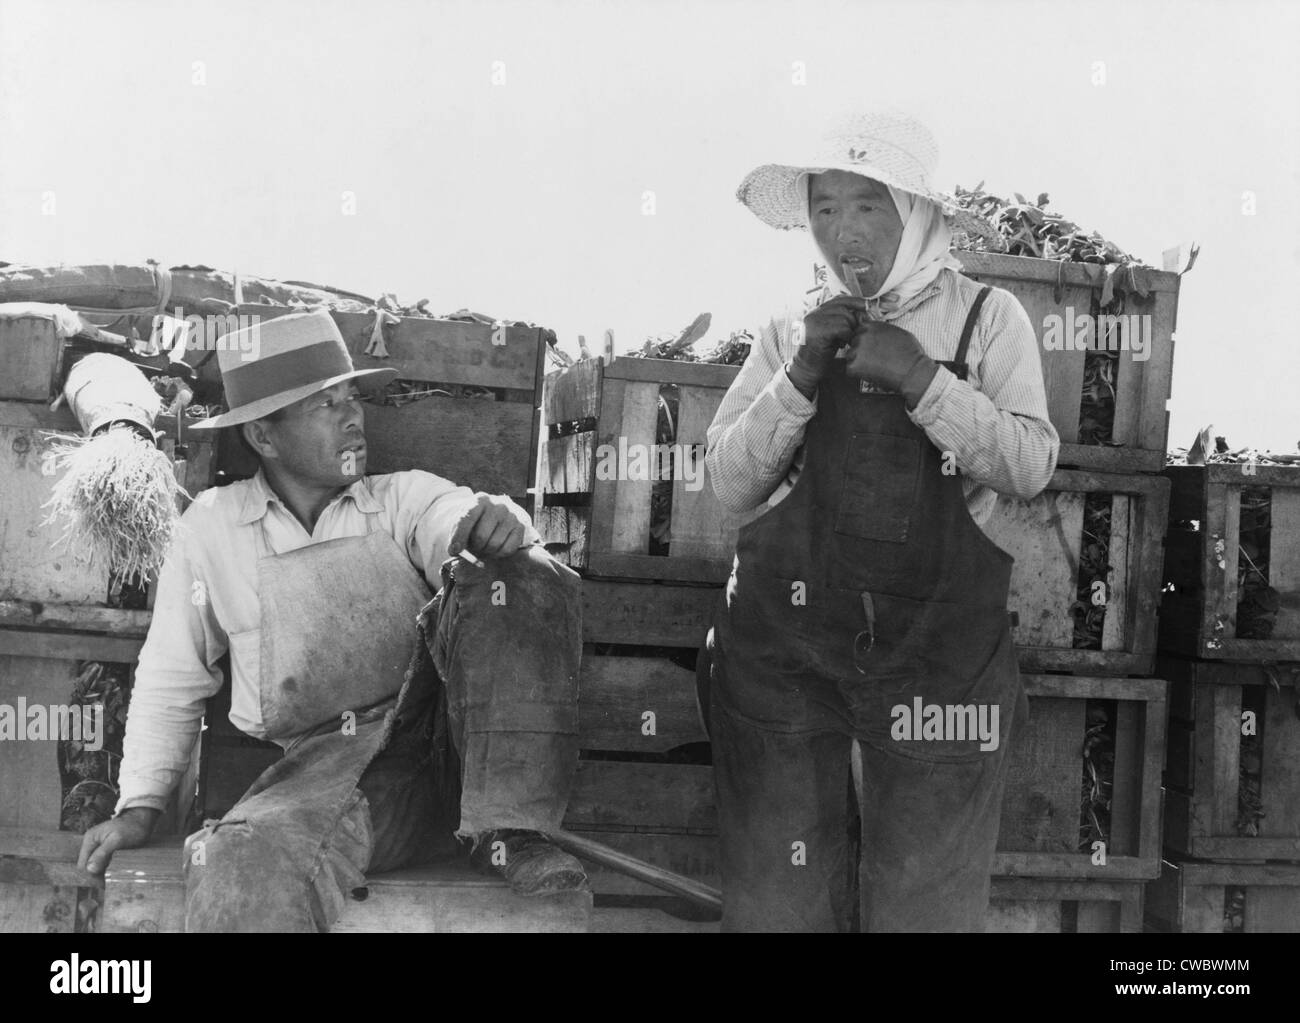 Japanese-Americans agricultural workers packing broccoli near Guadalupe, California. March 1937 photograph by Dorothea Lange. Stock Photo